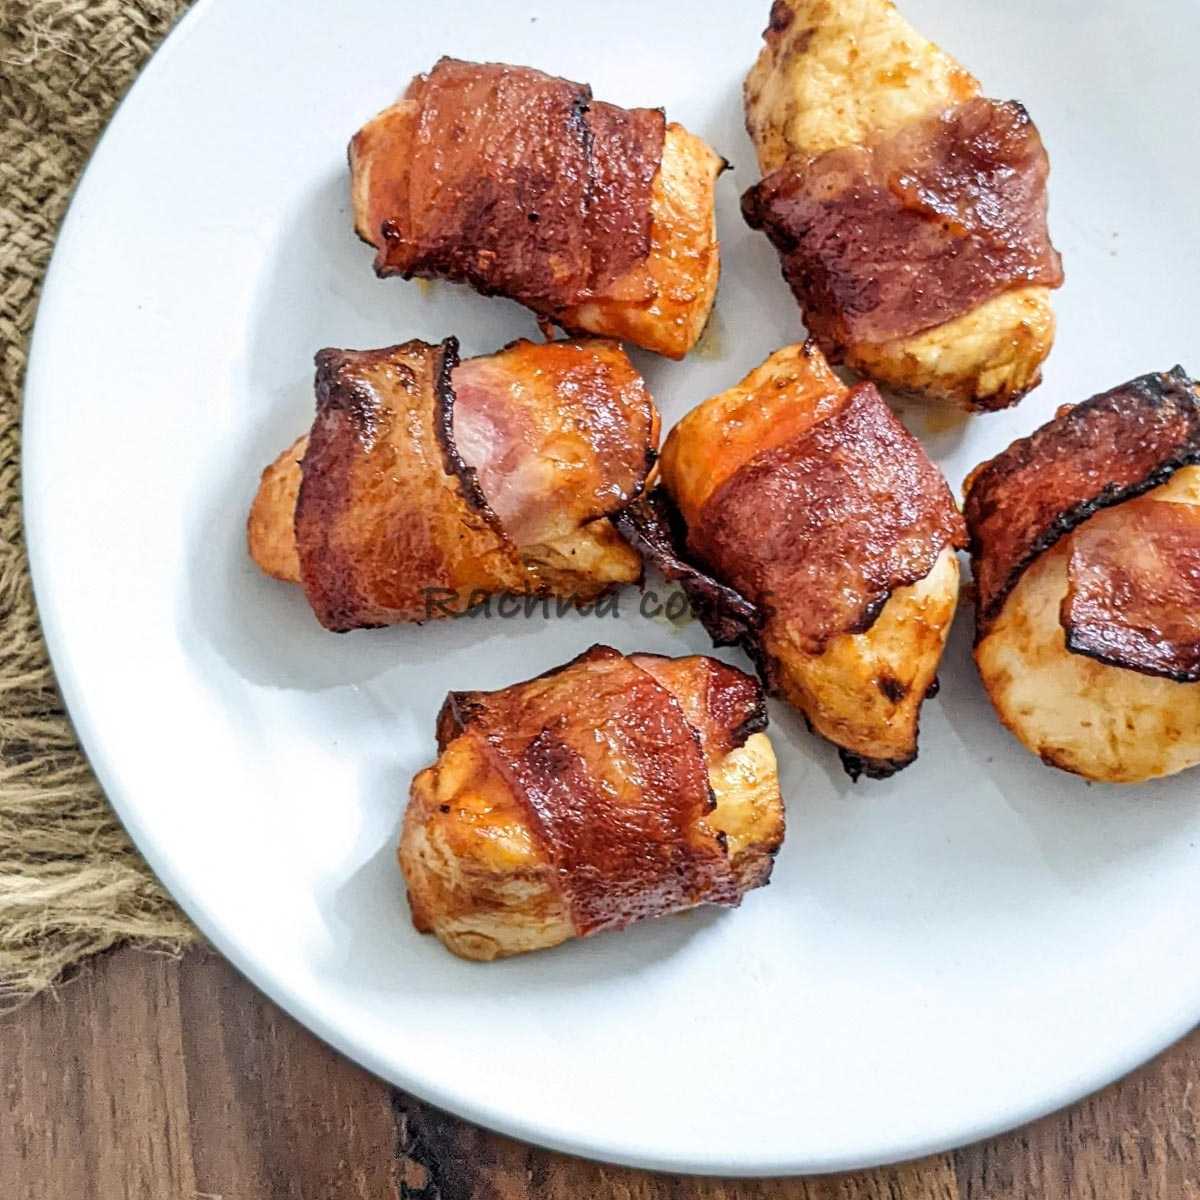 Bacon wrapped chicken bites on a white plate.